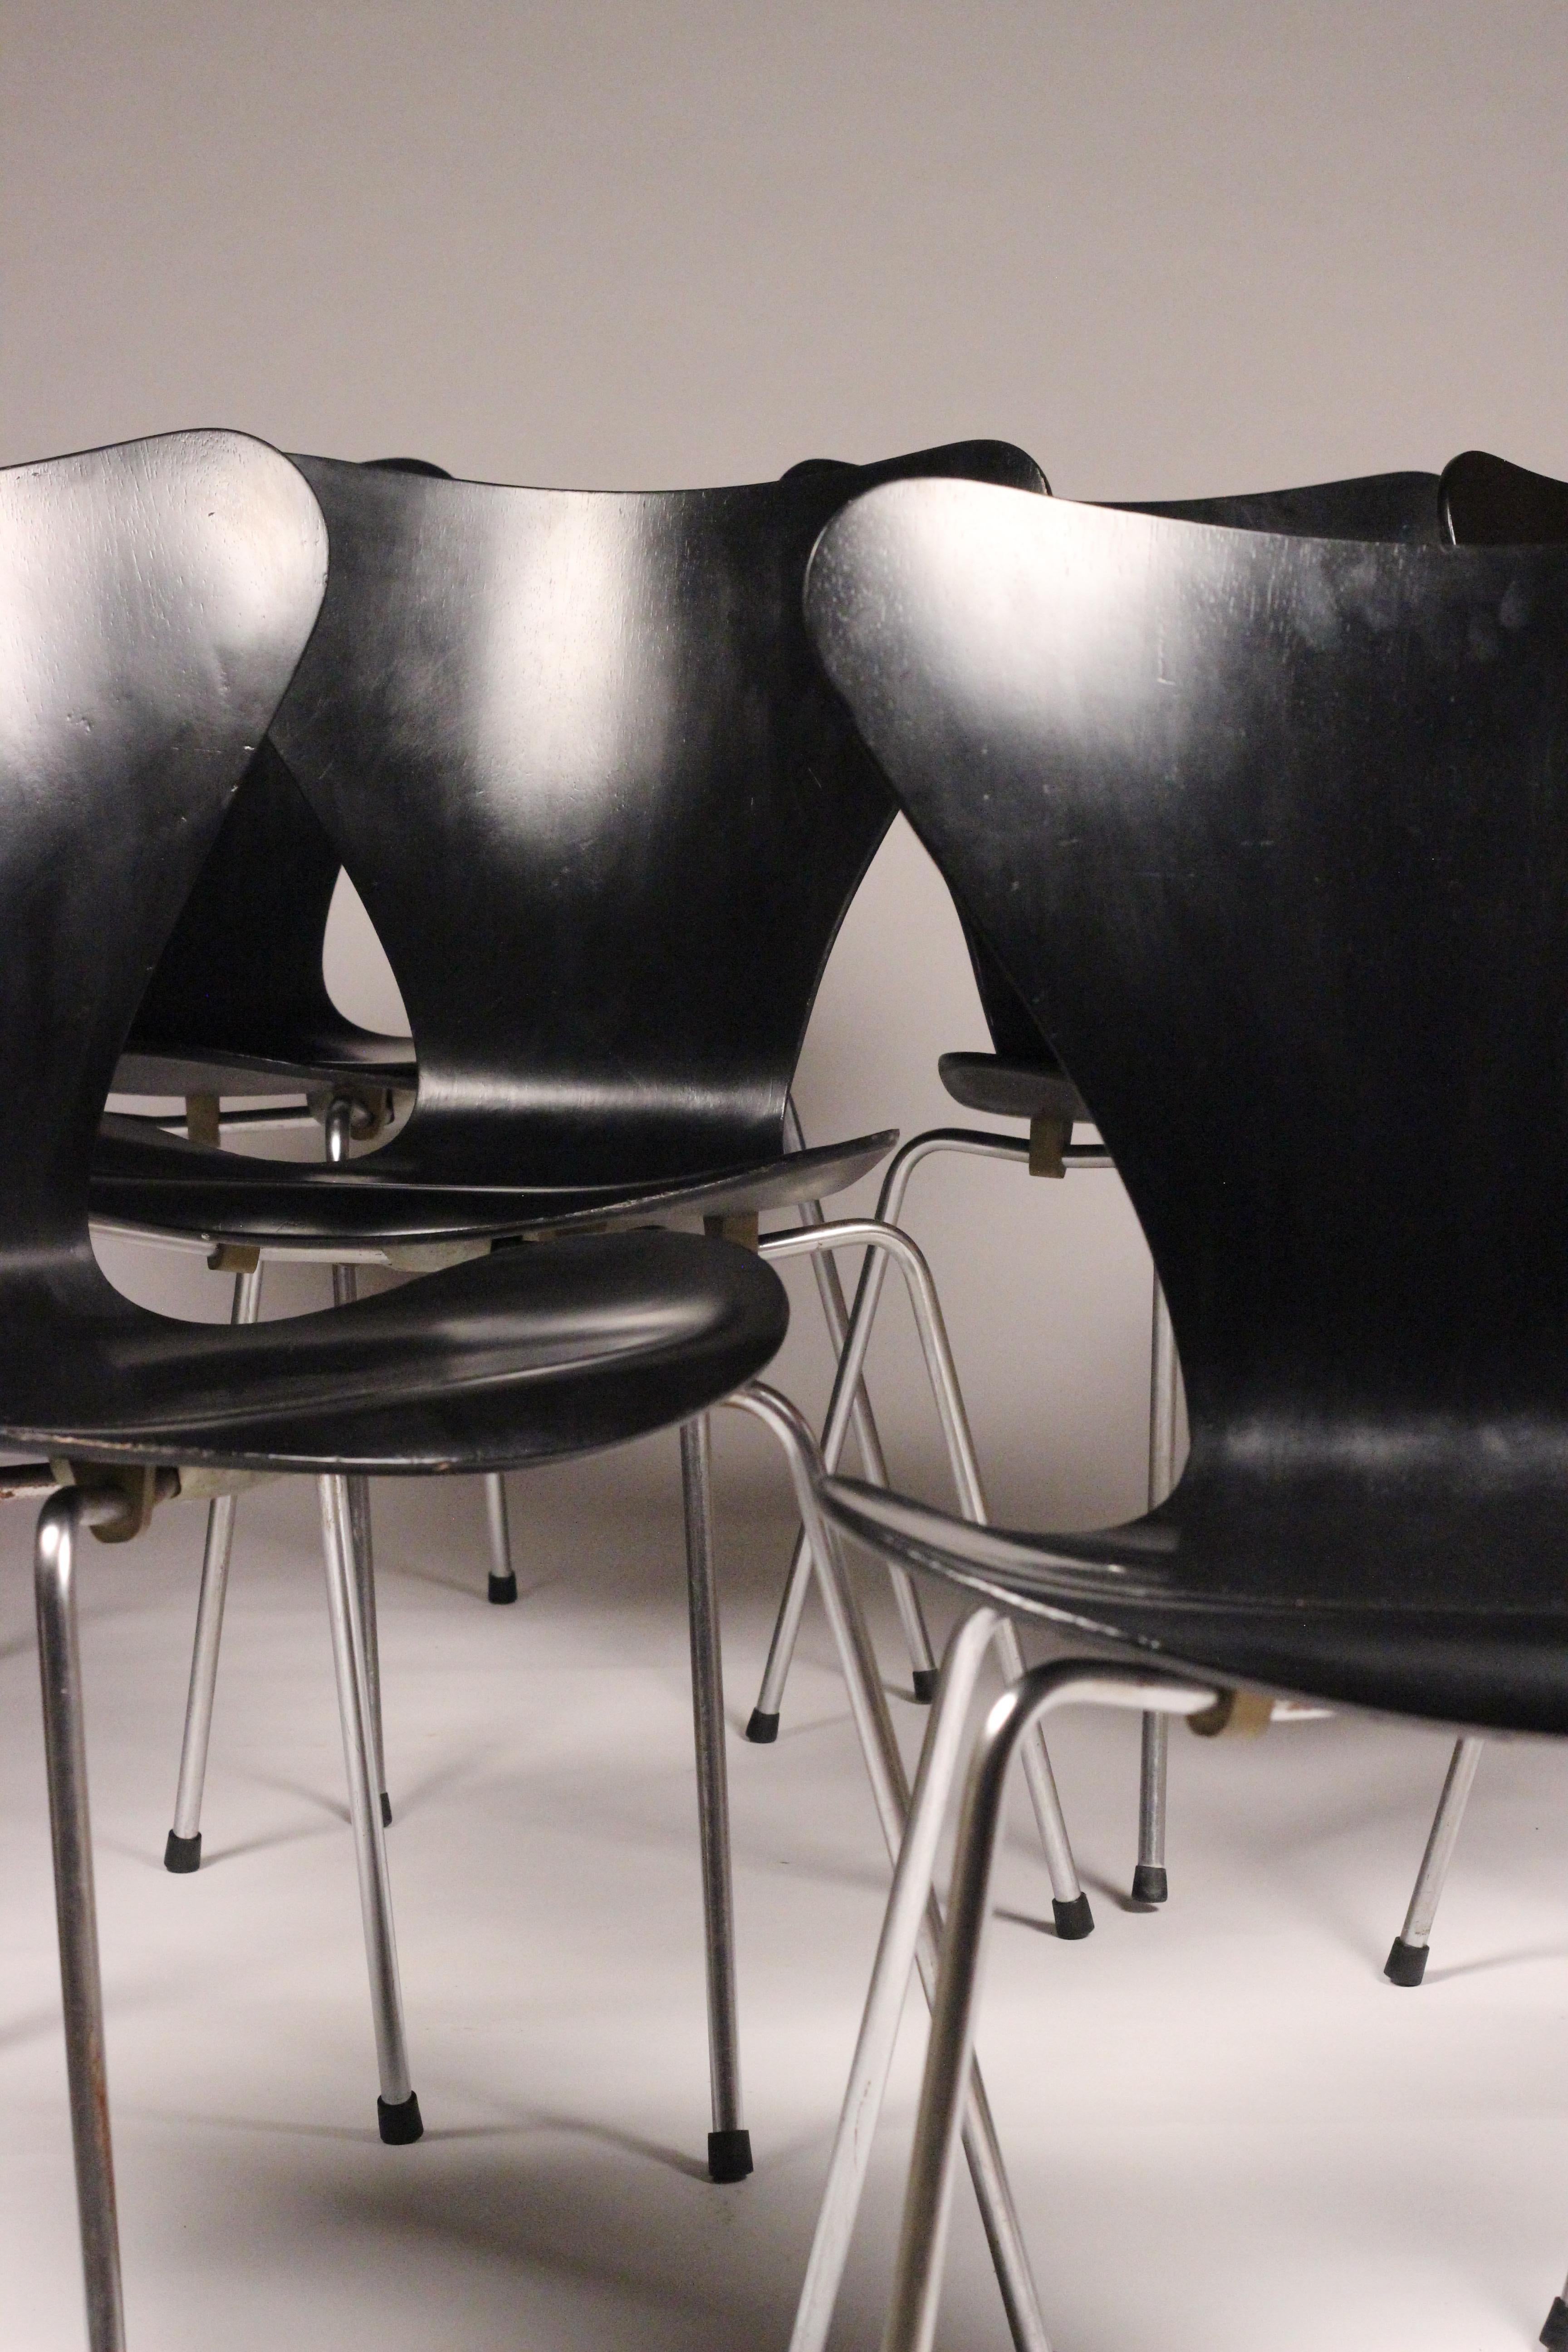 Arne Jacobsen Series 7 or 3107 Chairs by Fritz Hansen Mid Century Modern 1964 For Sale 9